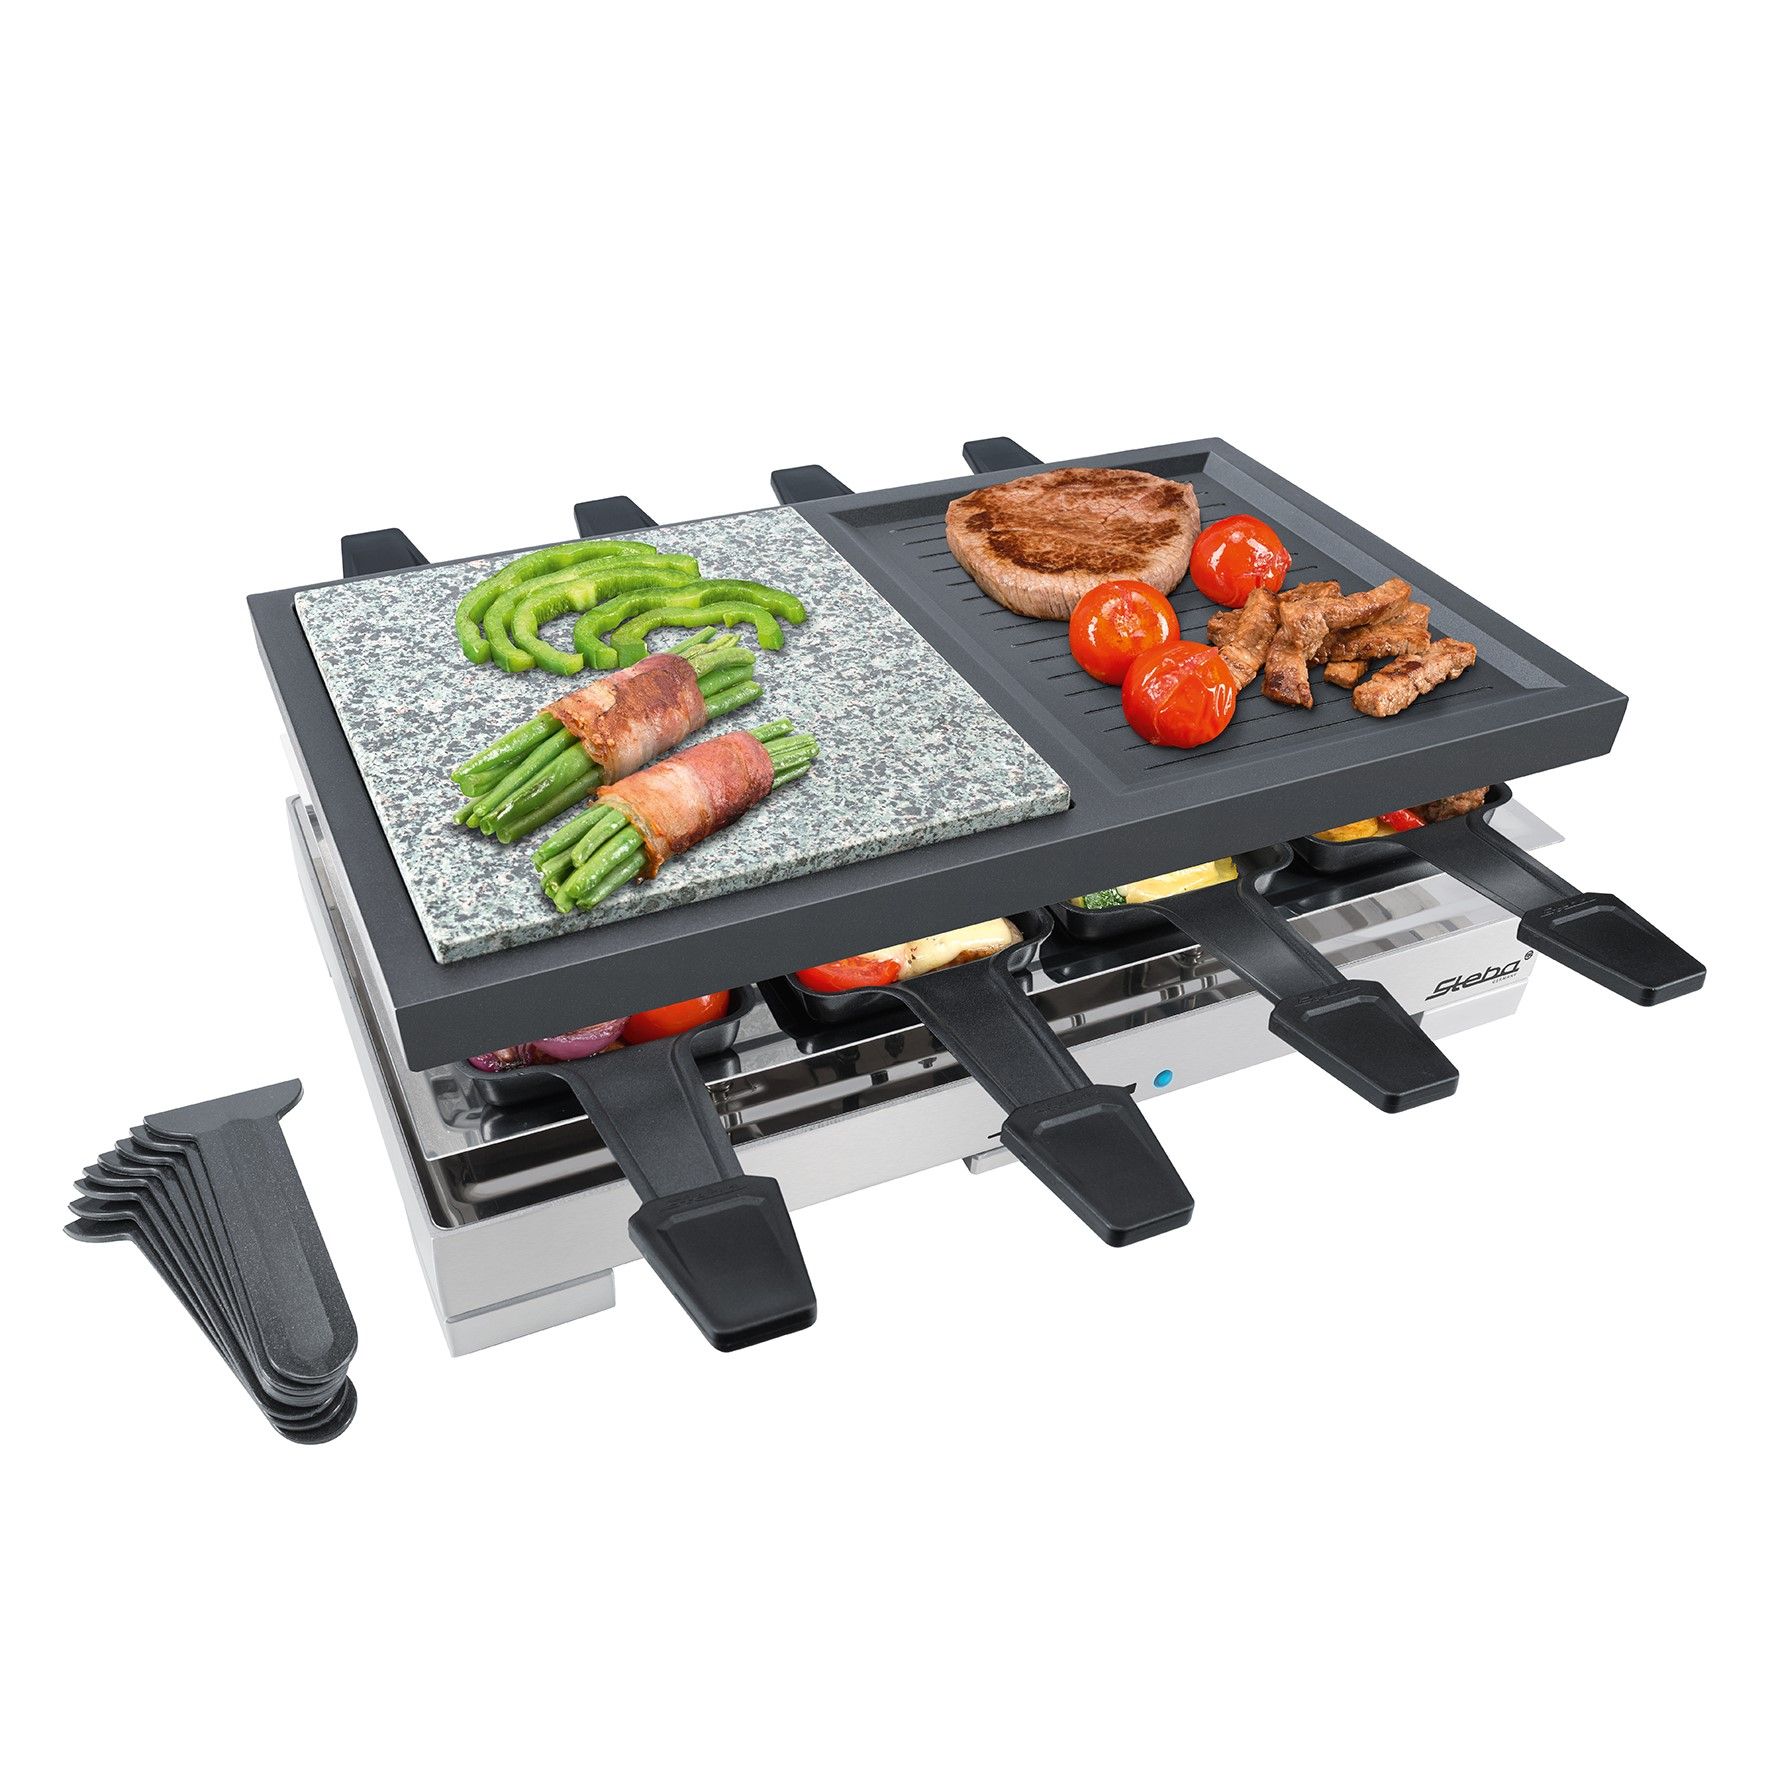 Steba Rc88 Delux Multi Raclette With Stone And Cast Griddle For 8 – Black /stainless Steel Stone Grill Plate, Non-stick Coated Aluminium Cast Plate